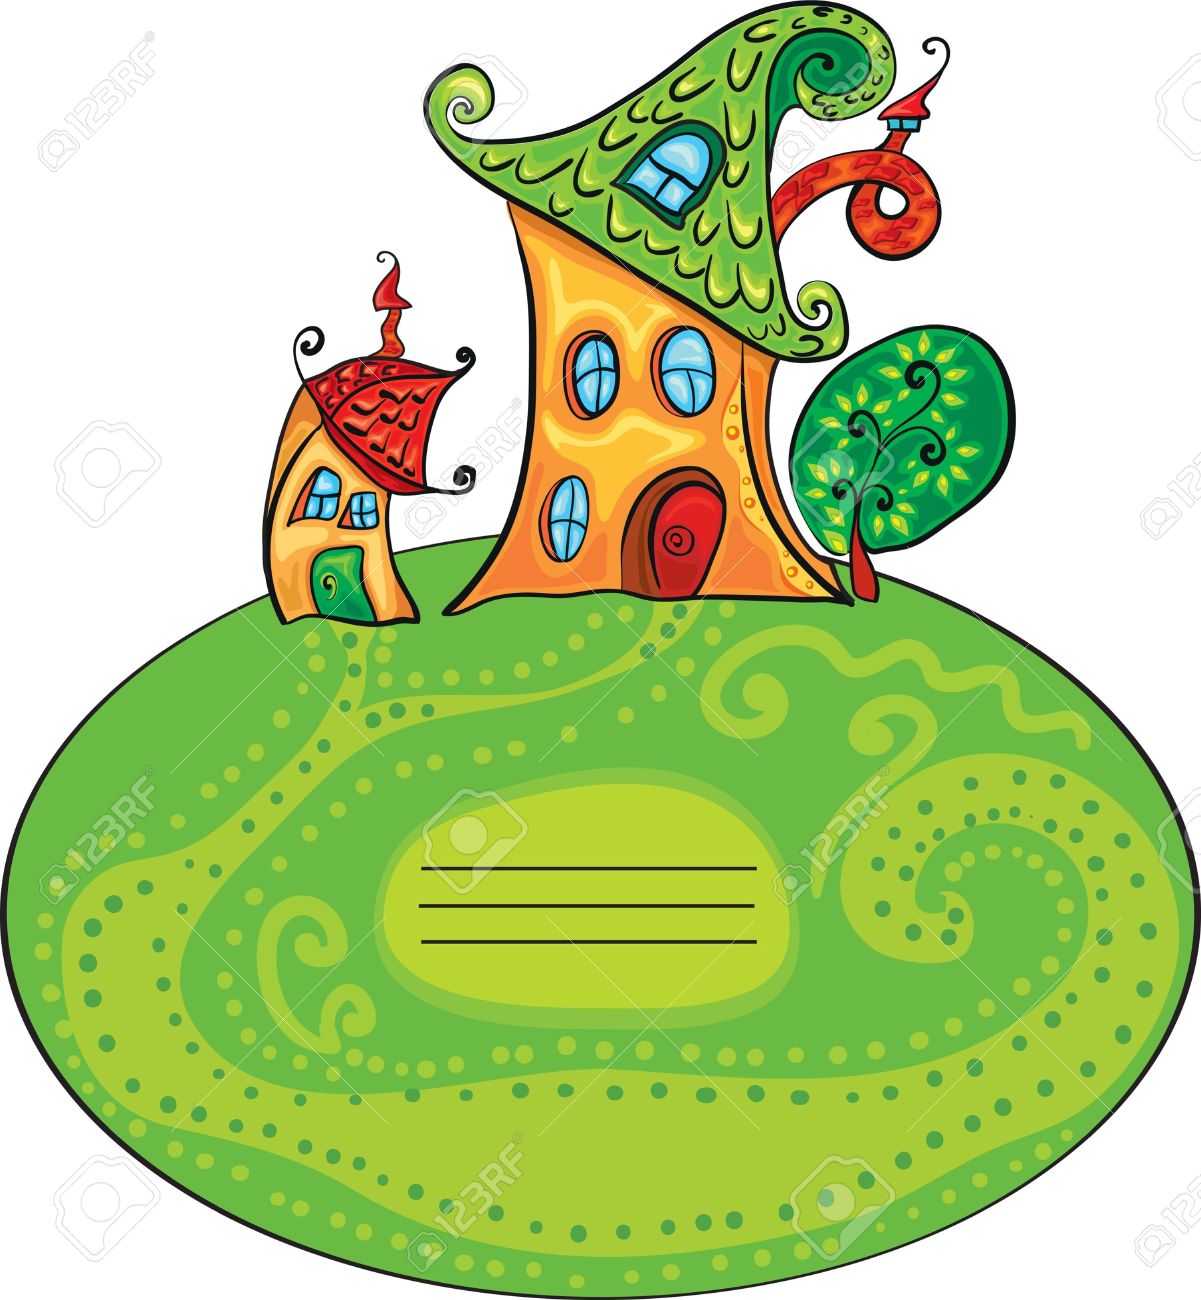 4,326 Fairy House Stock Vector Illustration And Royalty Free Fairy.